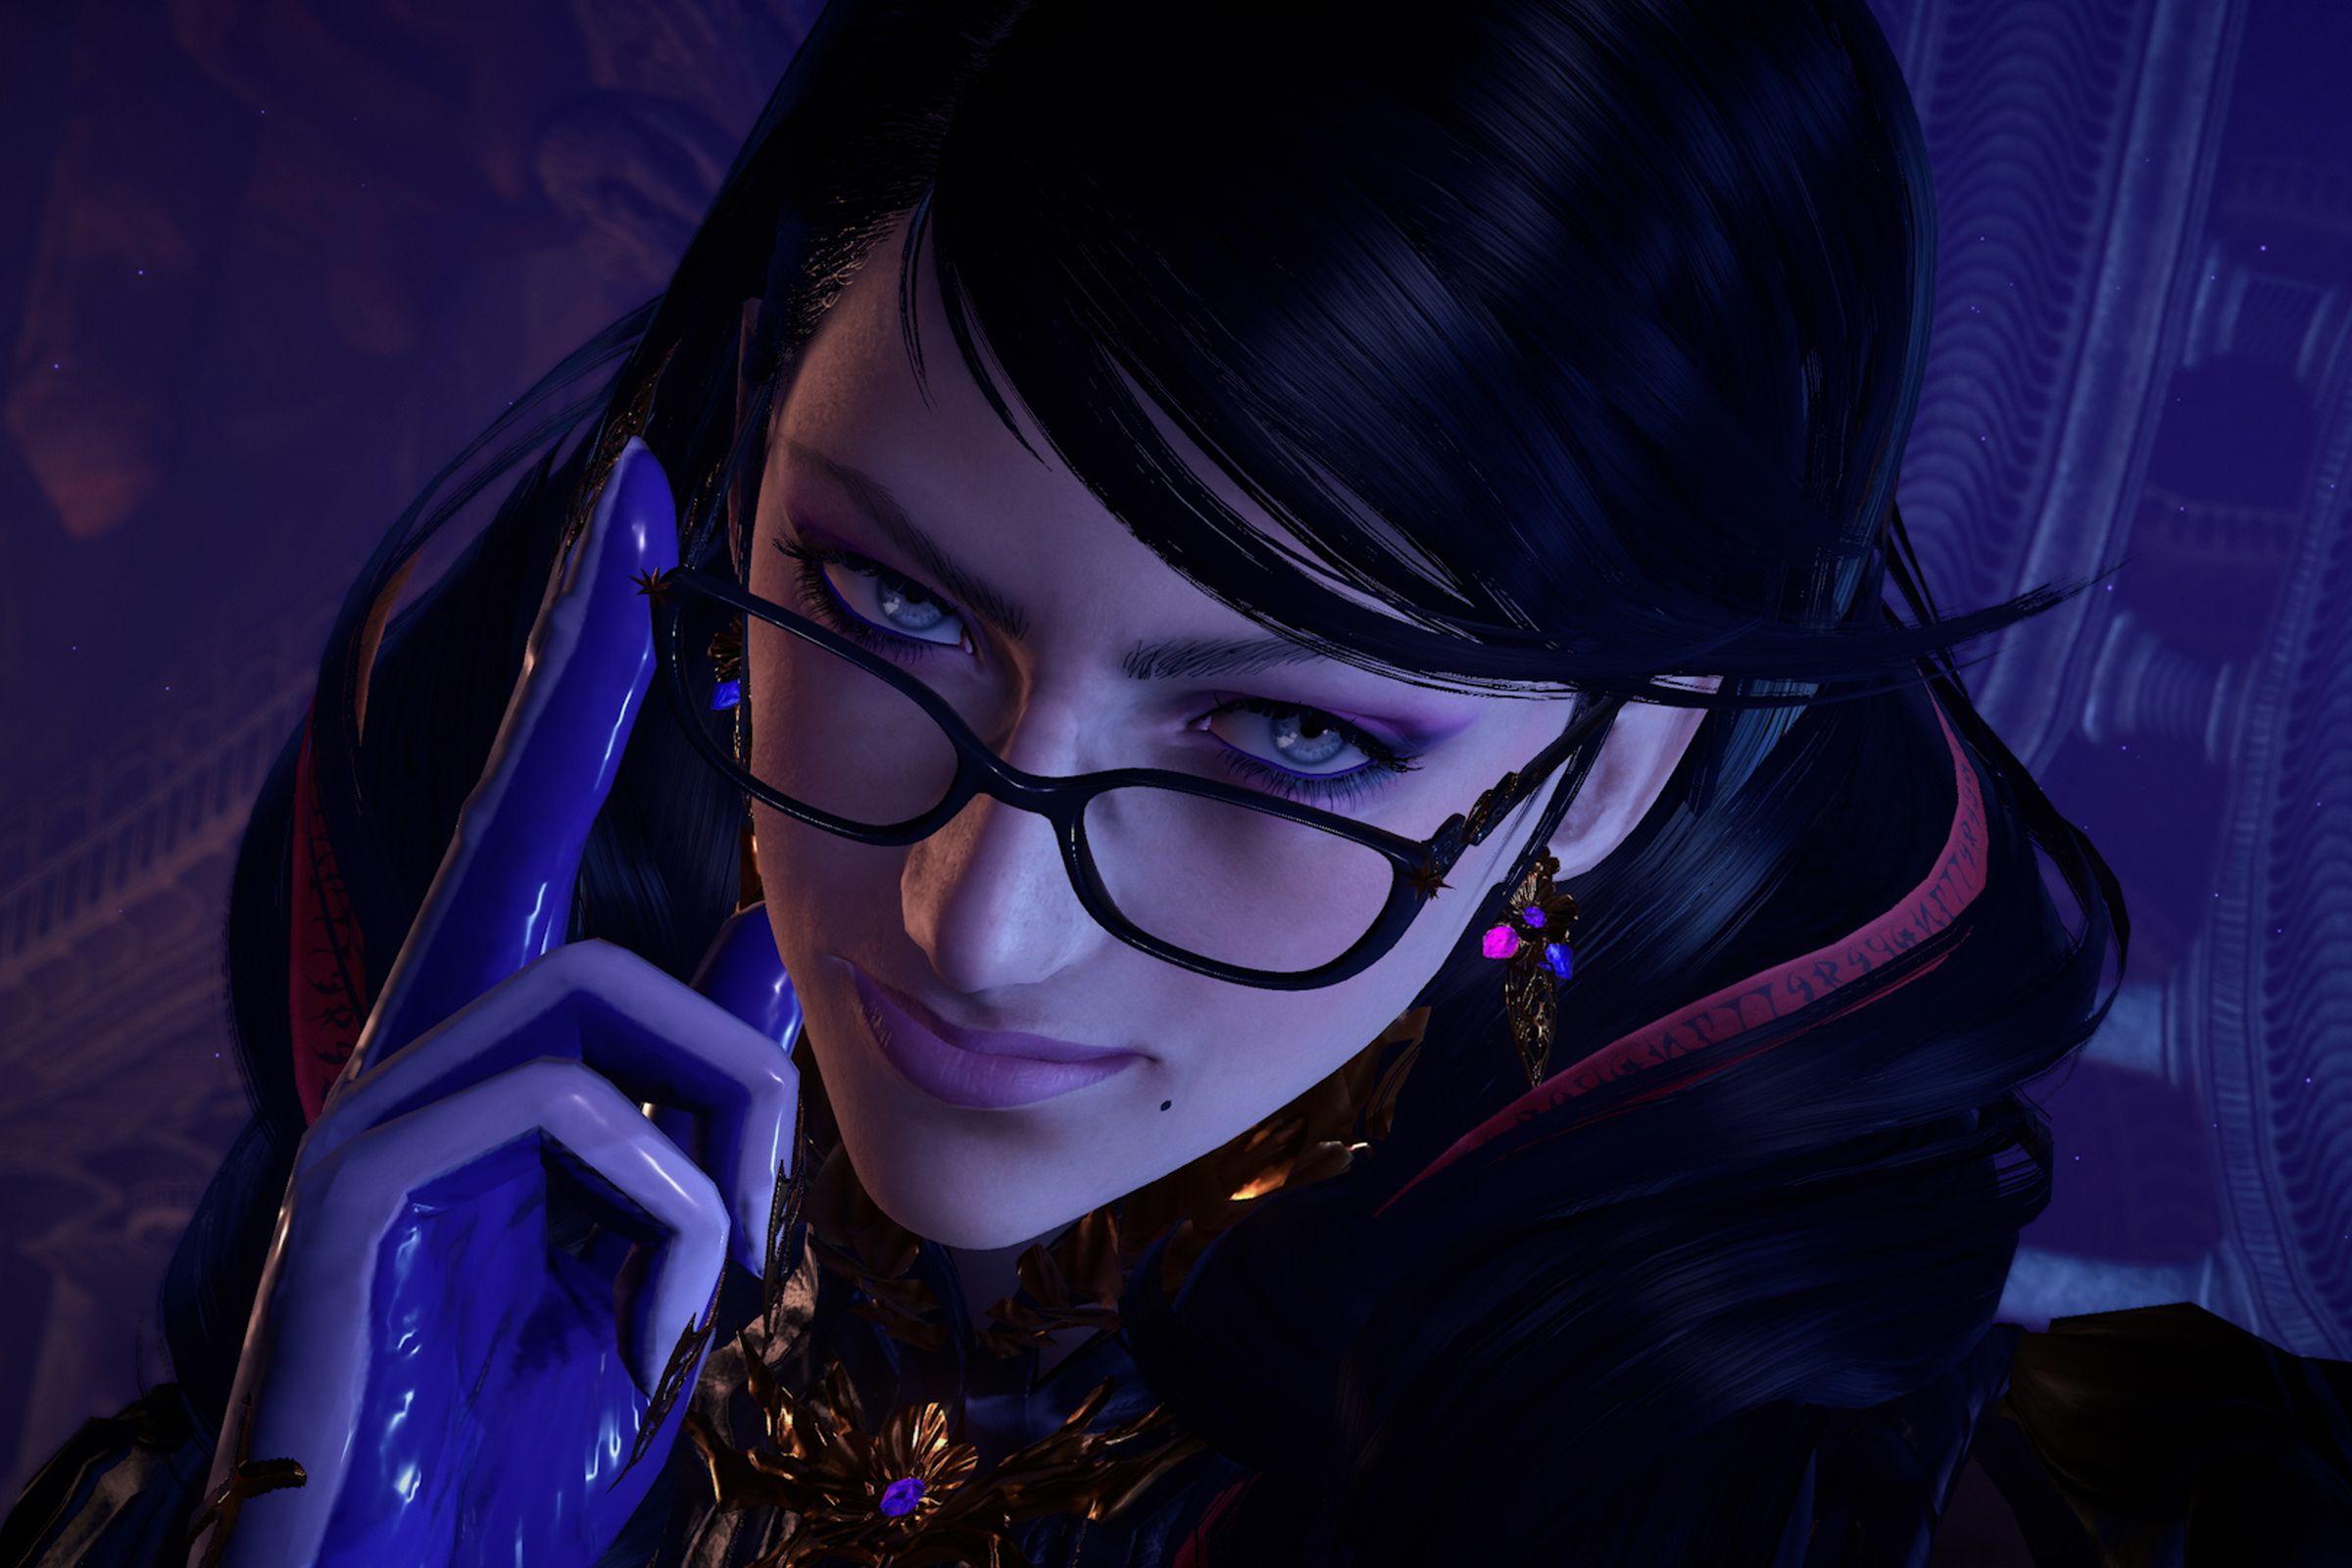 Screenshot from Bayonetta 3 featuring a close-up of Bayonetta’s face as she tips her glasses in skeptic observation